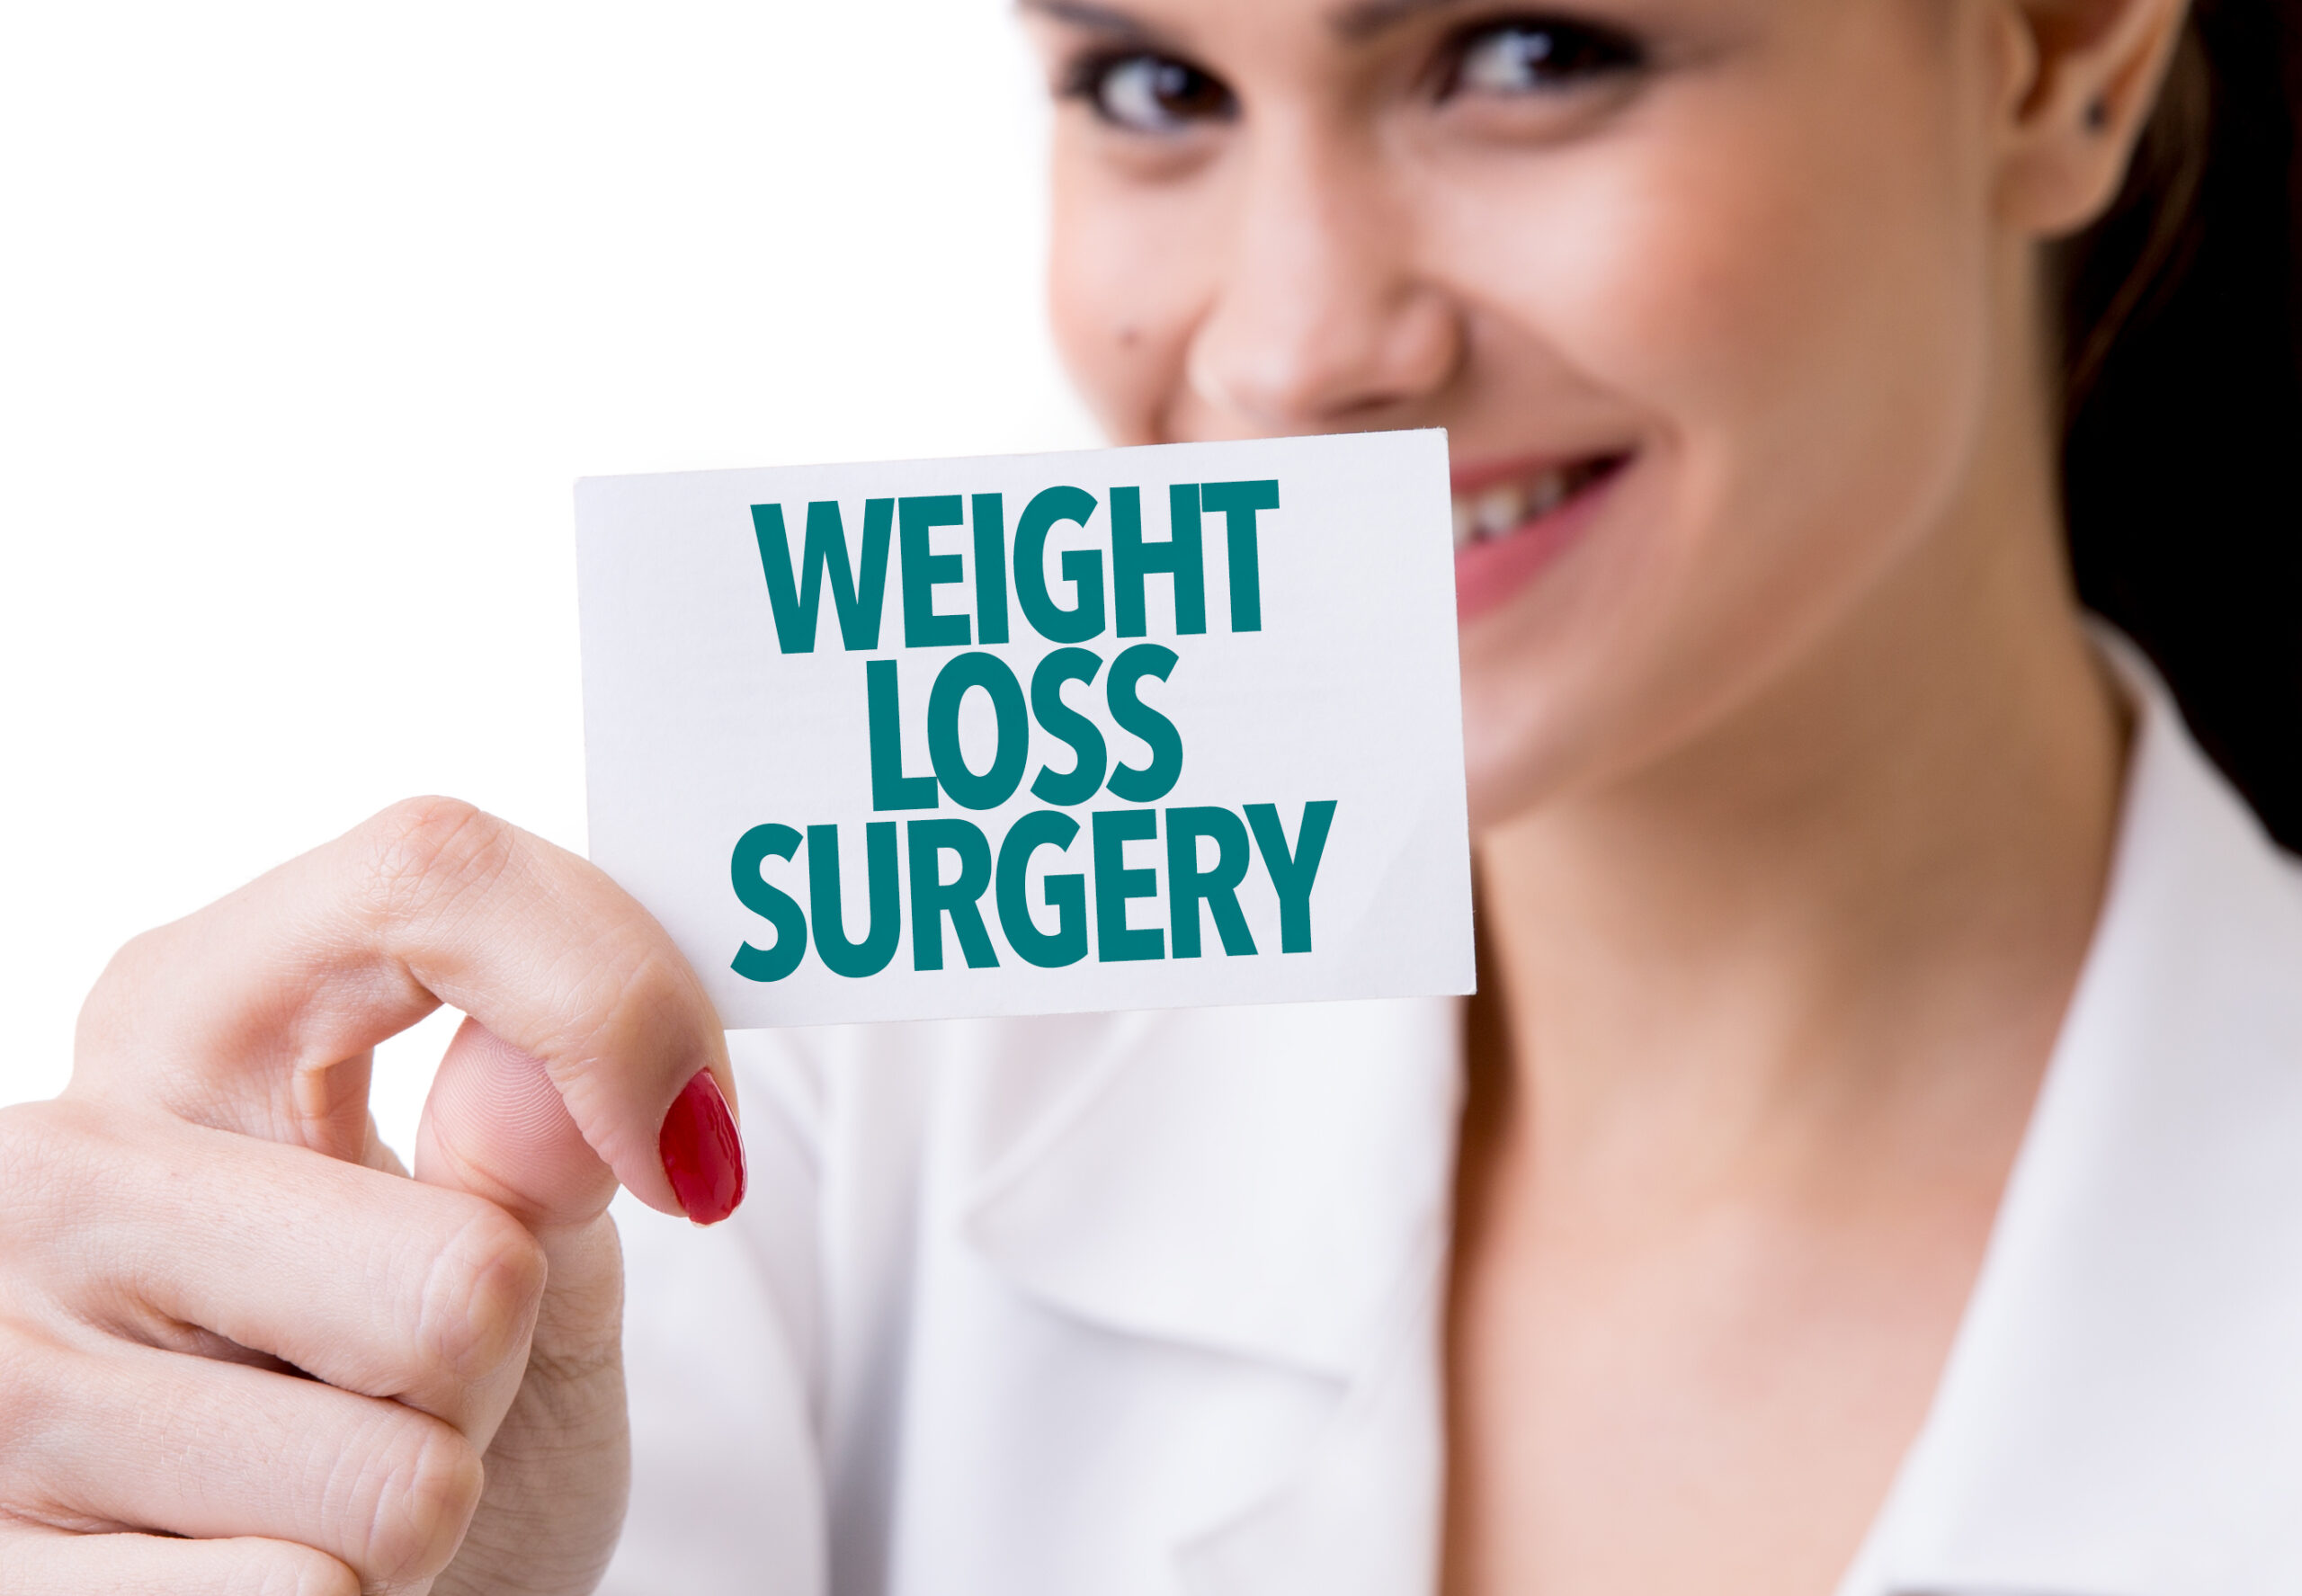 Female Doctor showing a note which reads "Weight Loss Surgery"